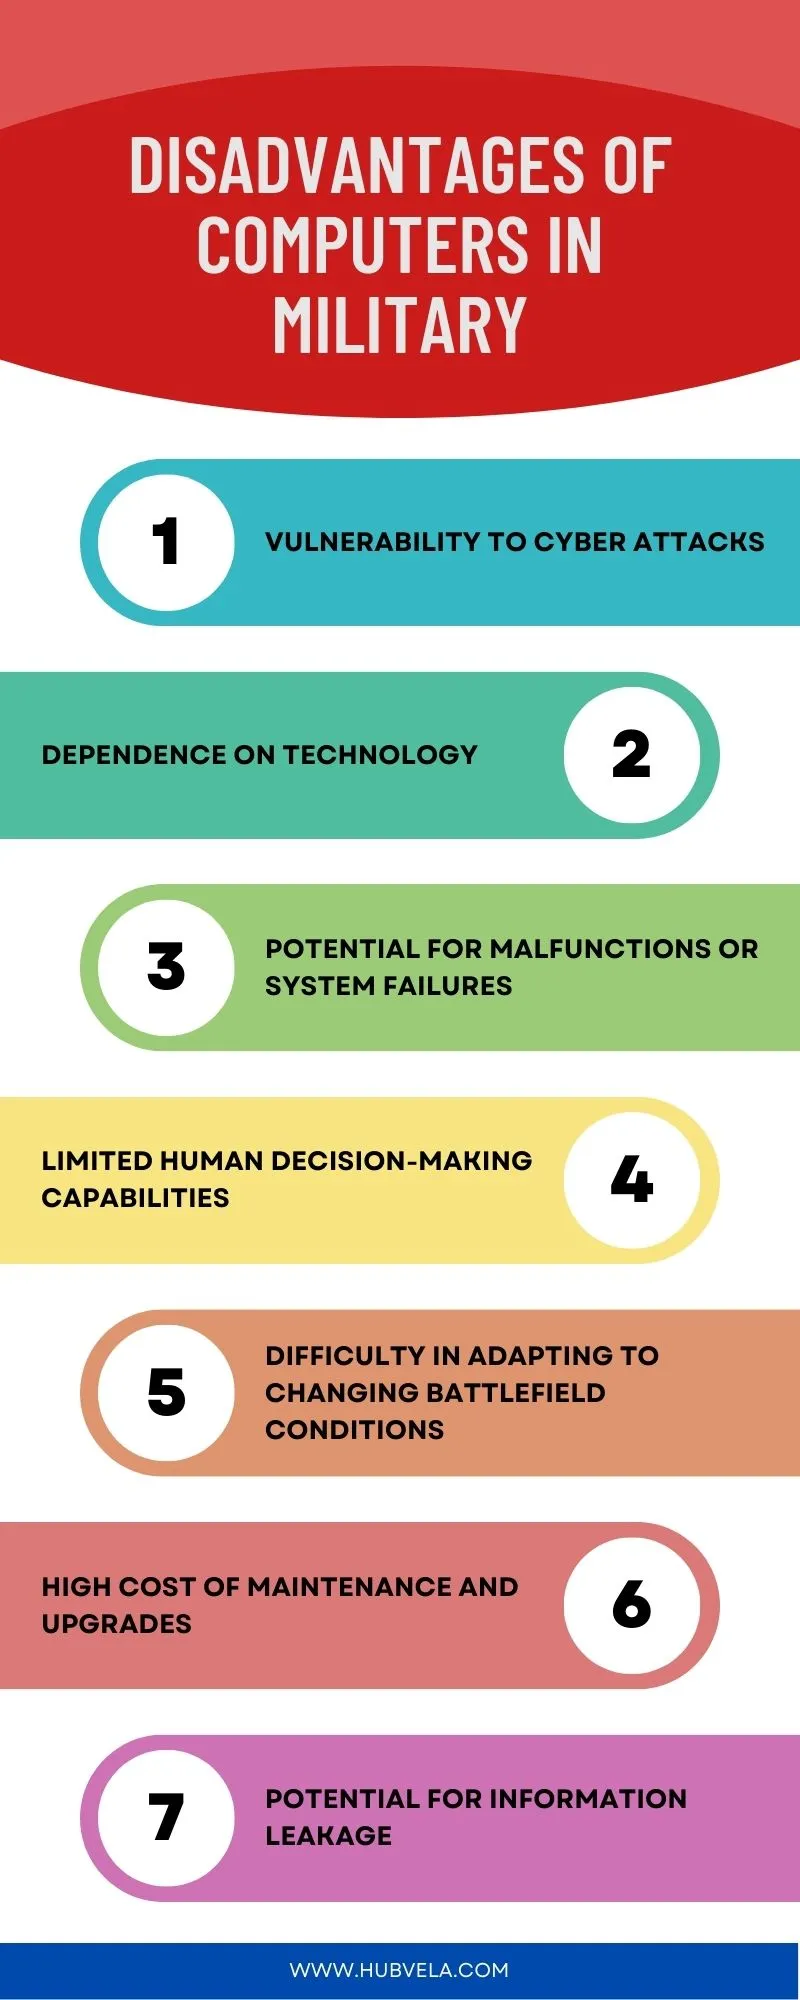 Disadvantages of Computers in Military Infographic